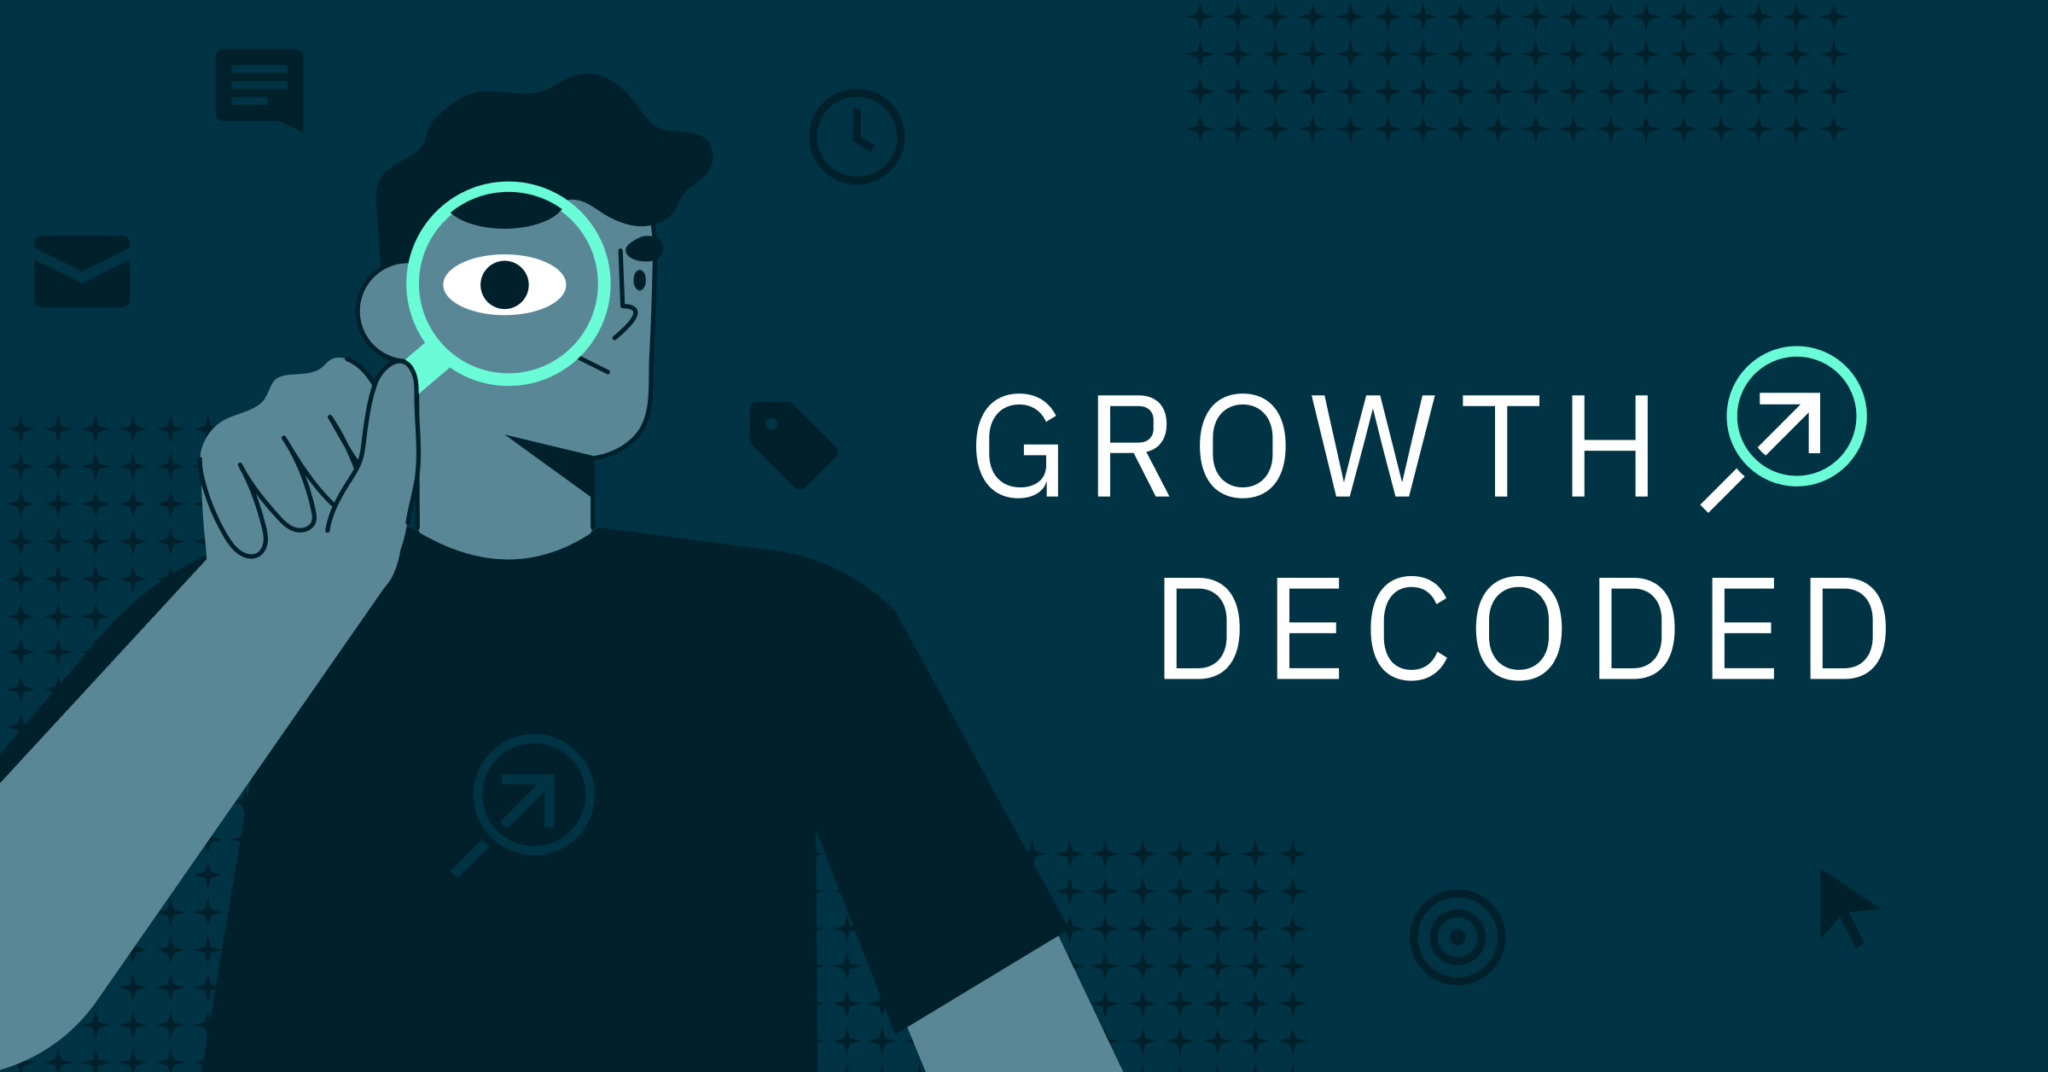 Growth Decoded: Delivering Marketing Best Practices to Improve the Customer Experience